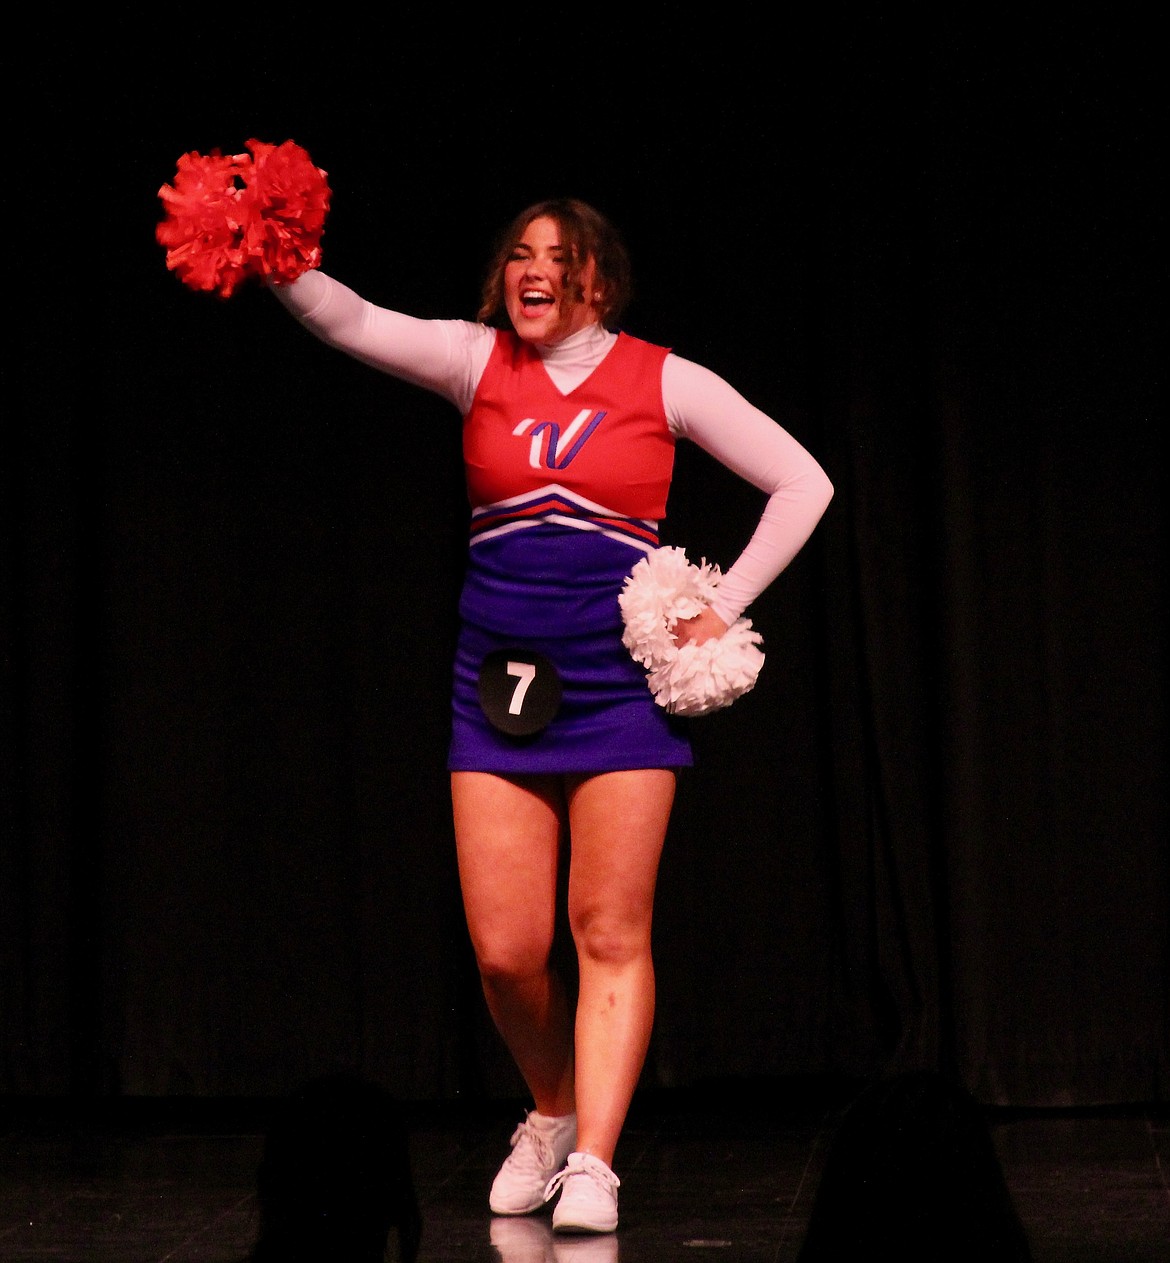 Hailey Kelsey performs cheer routine as her talent for DYW 2022 program.